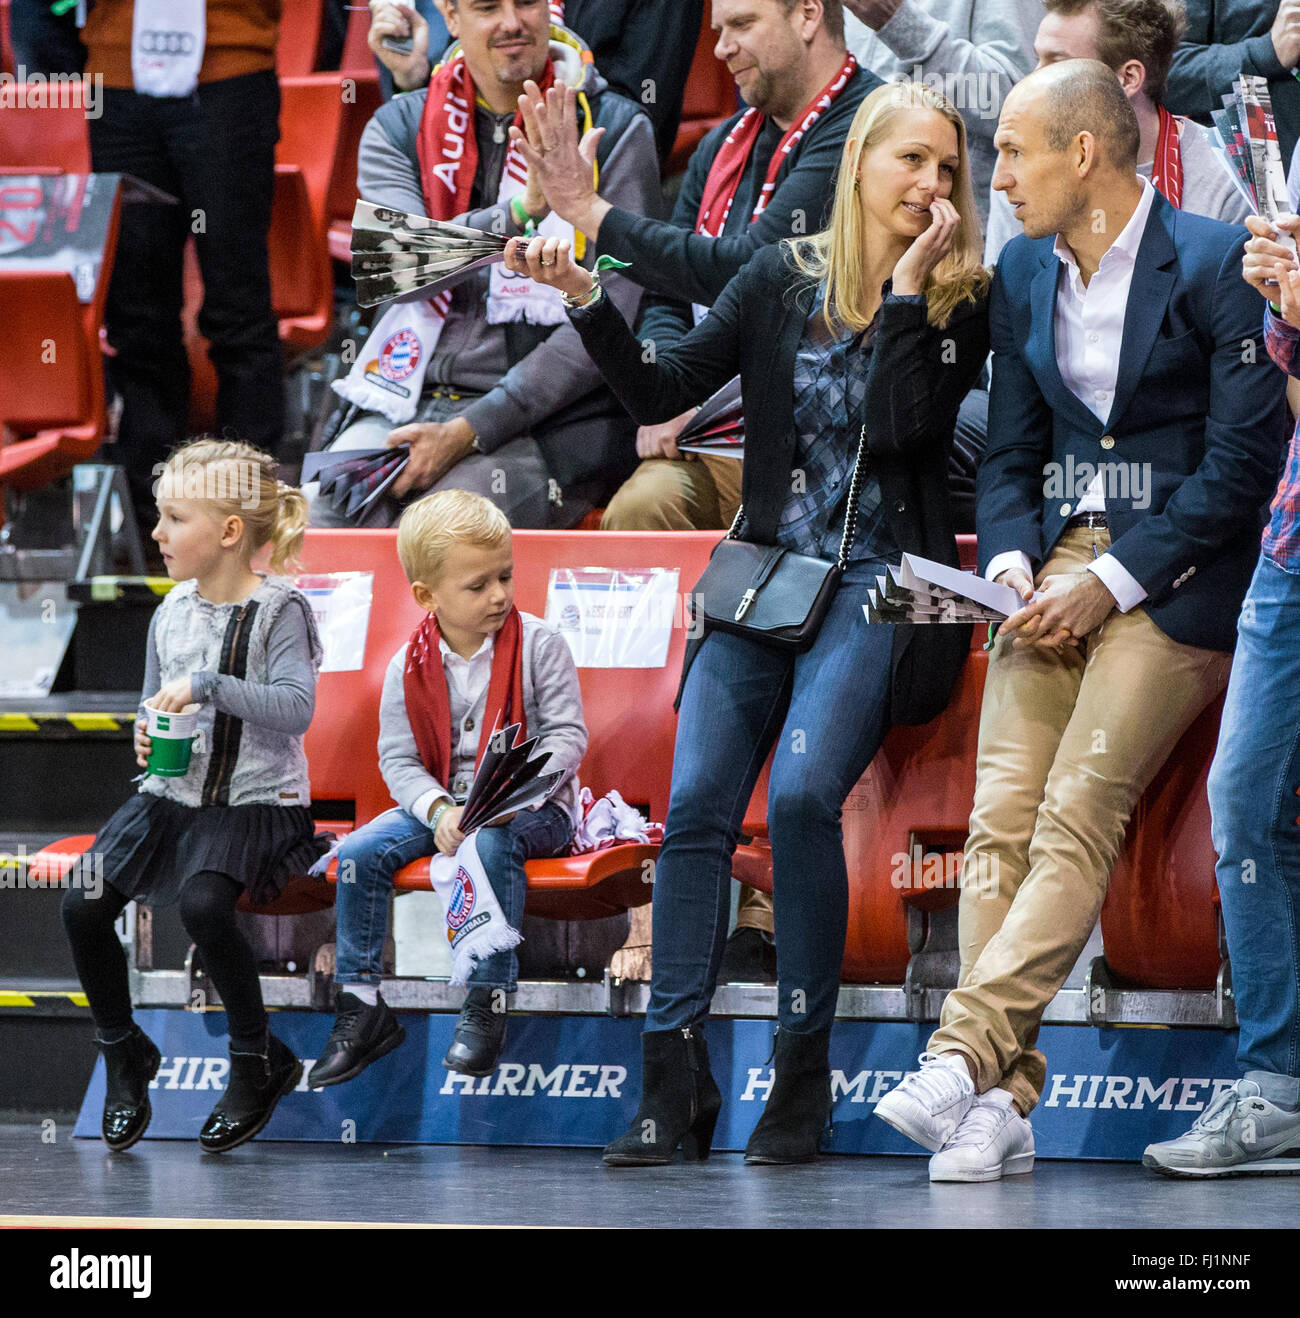 Munich, Germany. 28th Feb, 2016. FC Bayern Munich soccer player Arjen Robben, his wife Bernadien Eillert and two of their children sit in the stands at the German Bundesliga basketball game between Bayern Munich and ALBA Berlin in the Audi Dome in Munich, Germany, 28 February 2016. Photo: MARC MUELLER/dpa/Alamy Live News Stock Photo